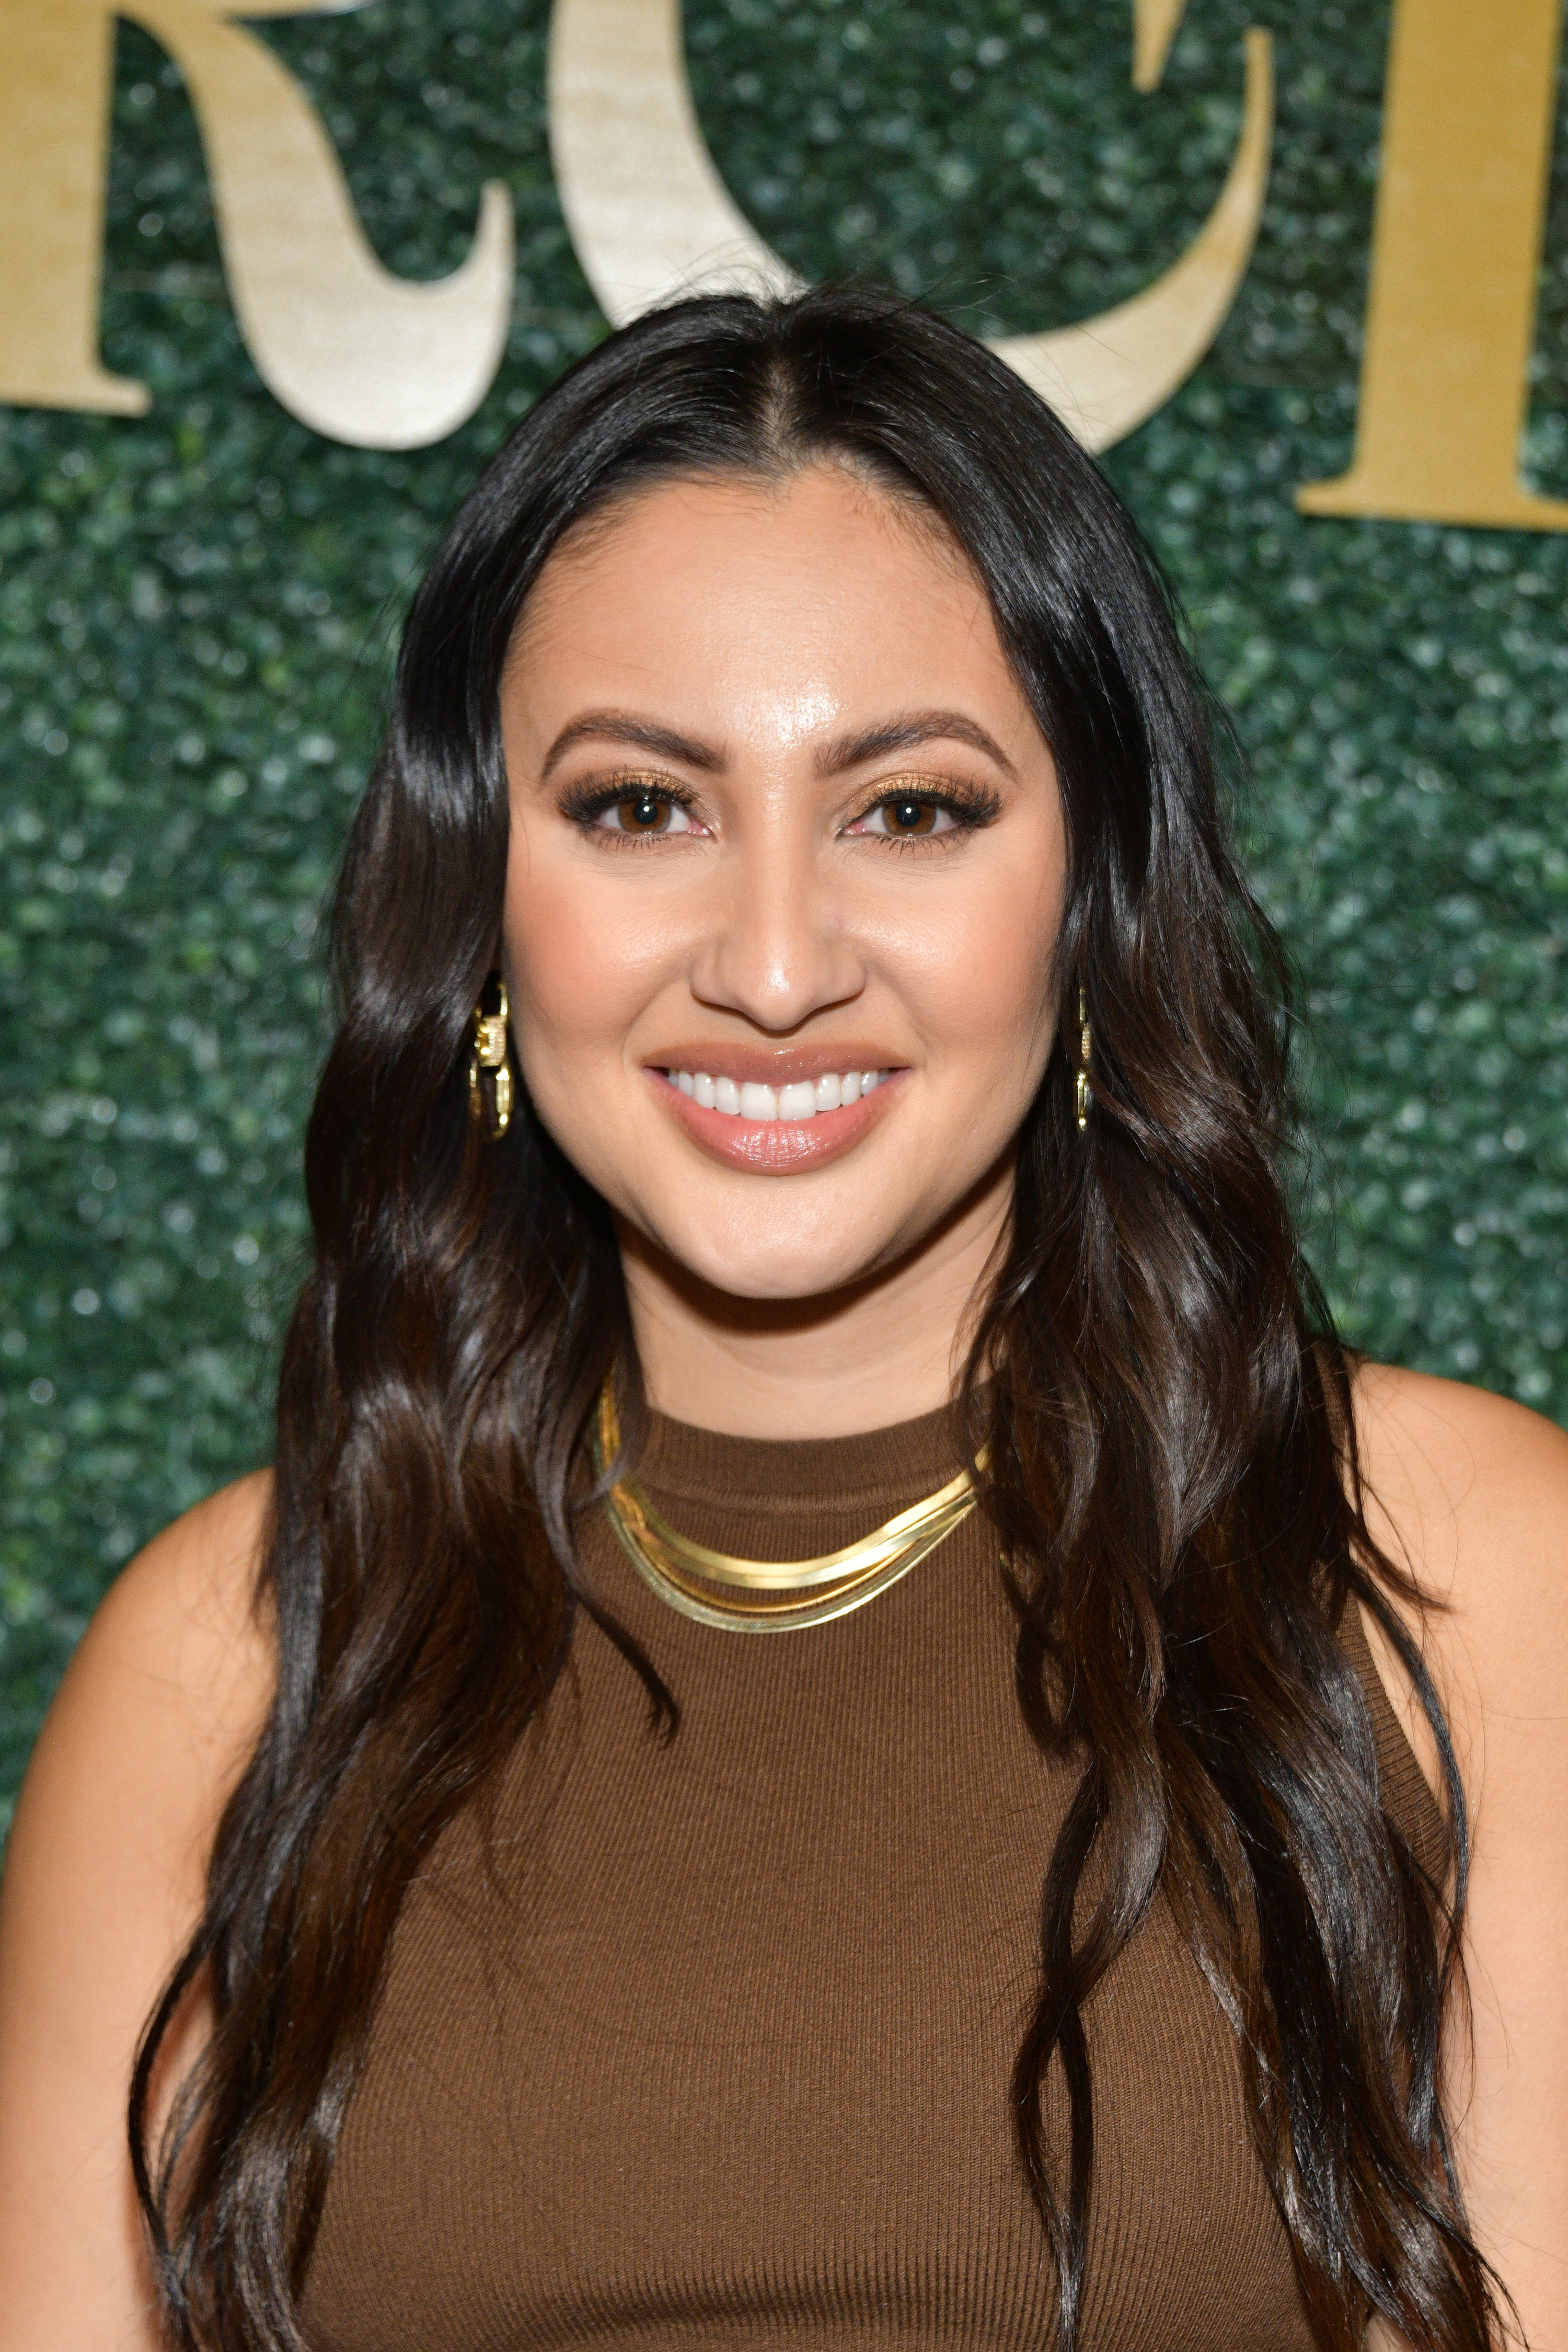 Selena Gomez's kidney donor Francia Raisa is now being brutally